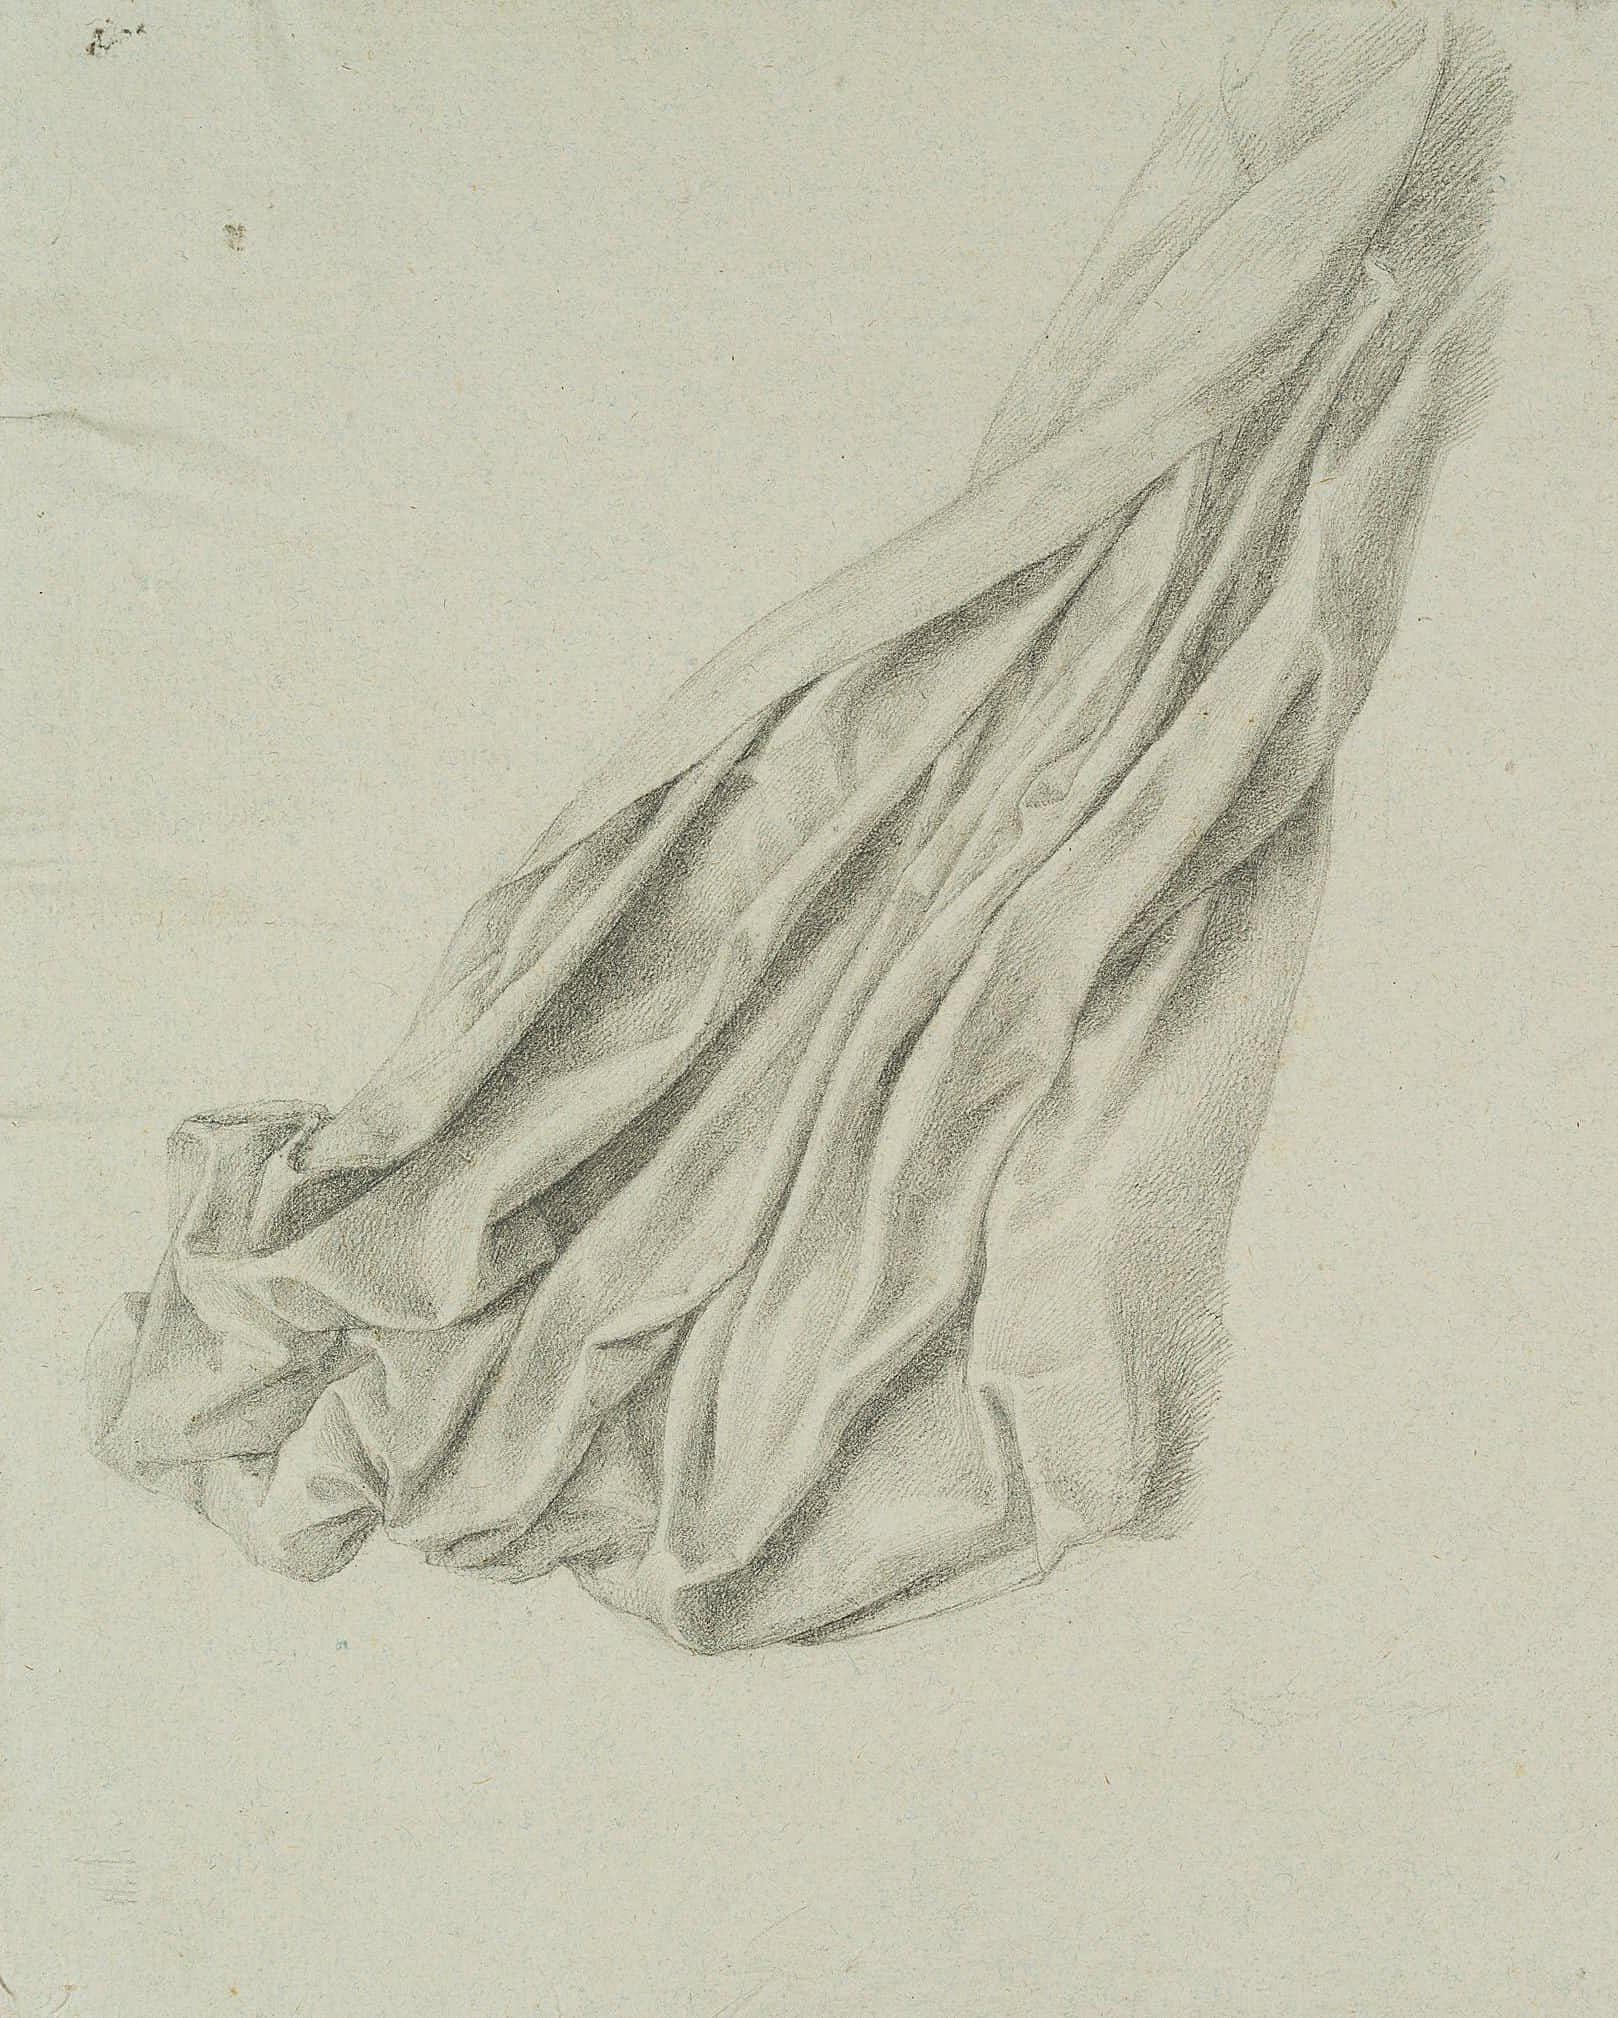 Trajan Wallis (1794 Florence - 1892 ): Robe study, 19th century, Pencil

Technique: Pencil on Paper

Date: 19th century

Description:  Watermark: Three moons

Provenance: From the estate of the artist.

 

Keywords: Robe study, antique drapery,